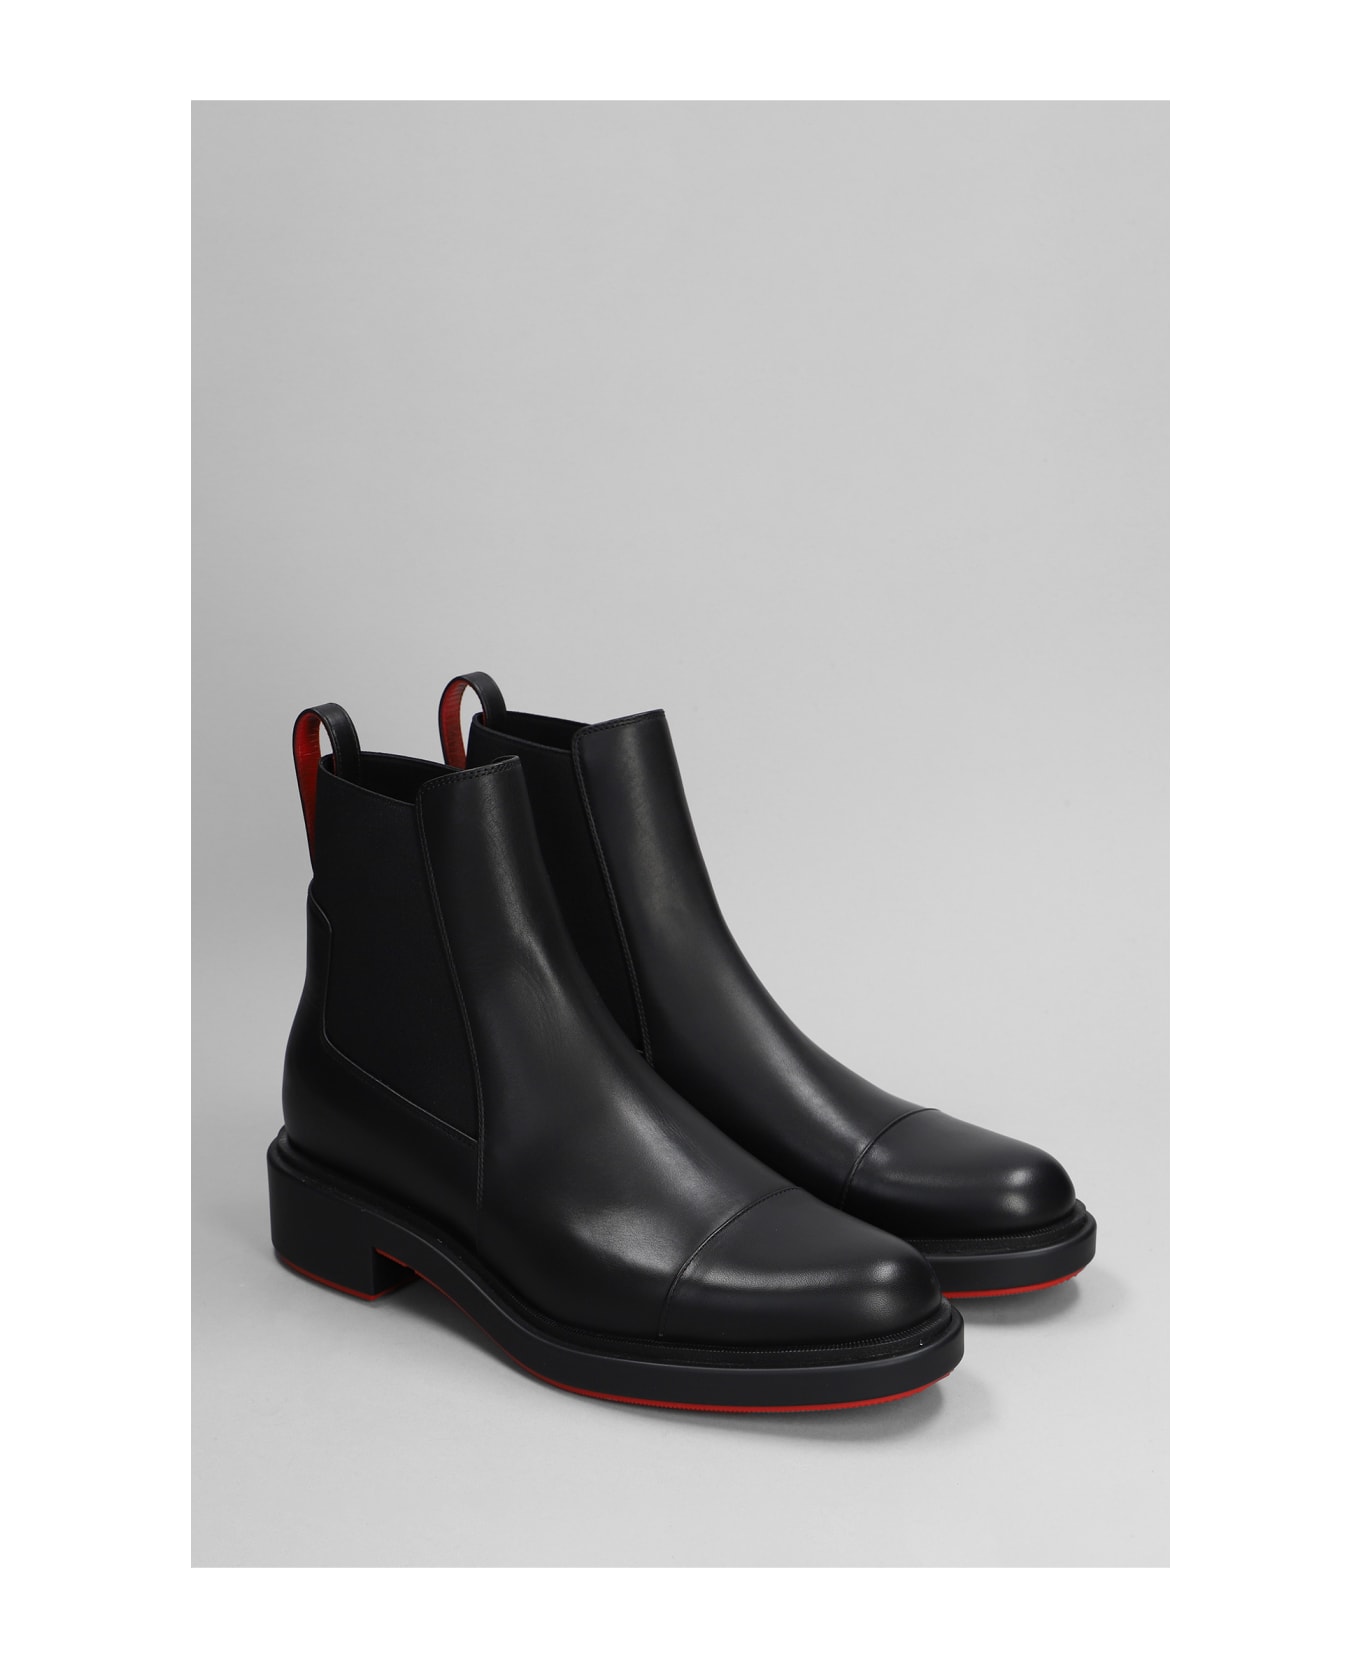 Christian Louboutin Urbino Ankle Boots In Black Leather - black ブーツ